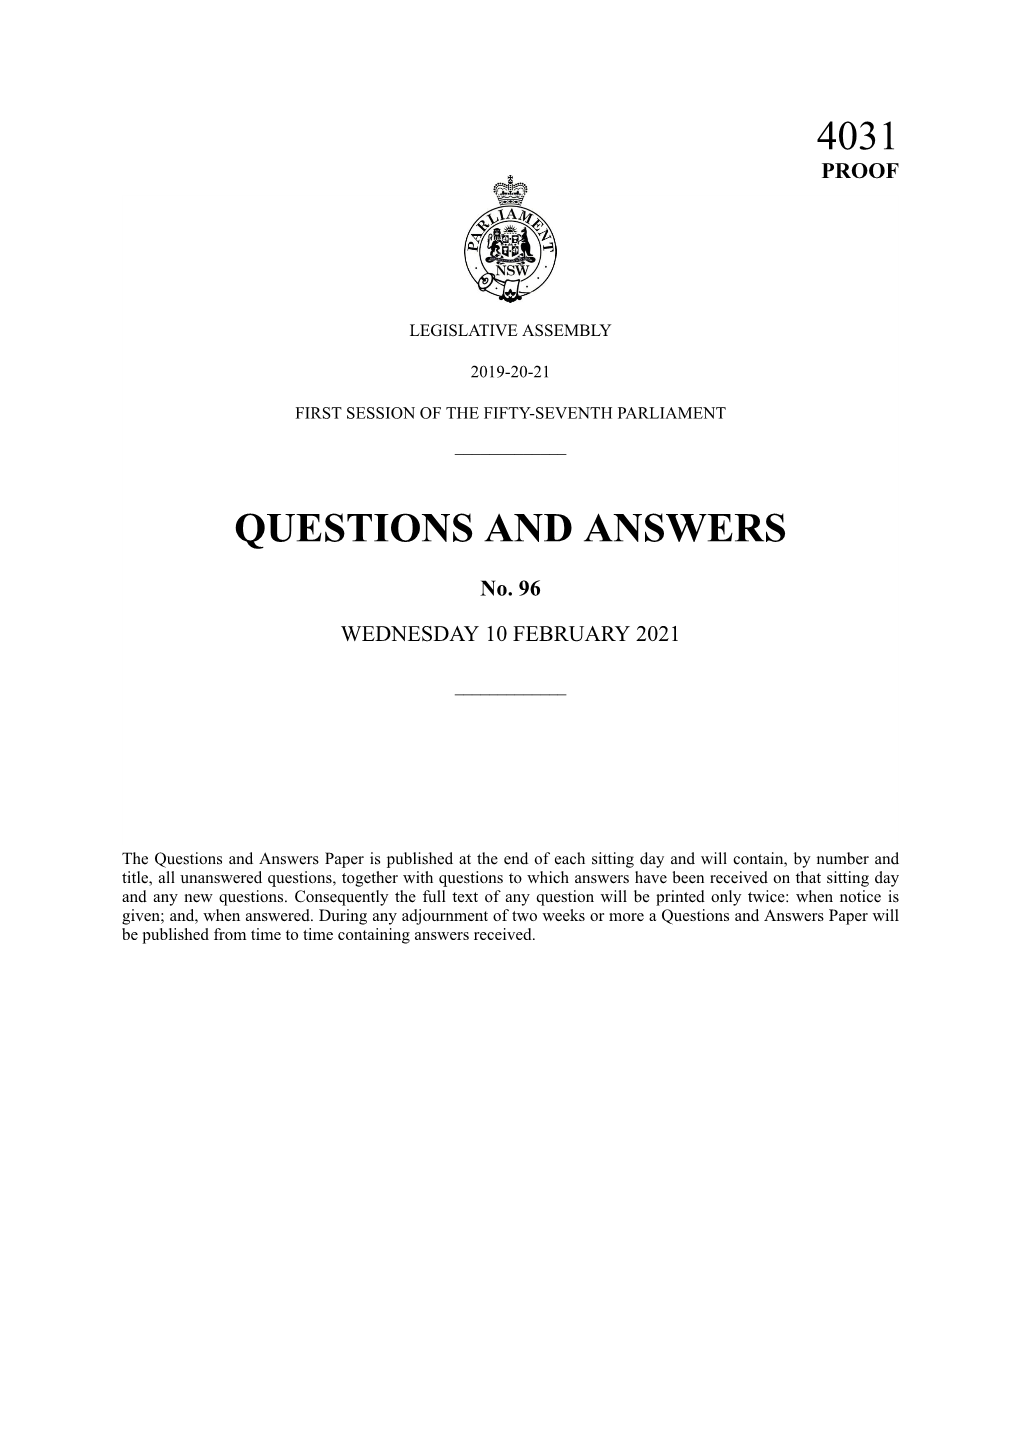 Questions and Answers 4031